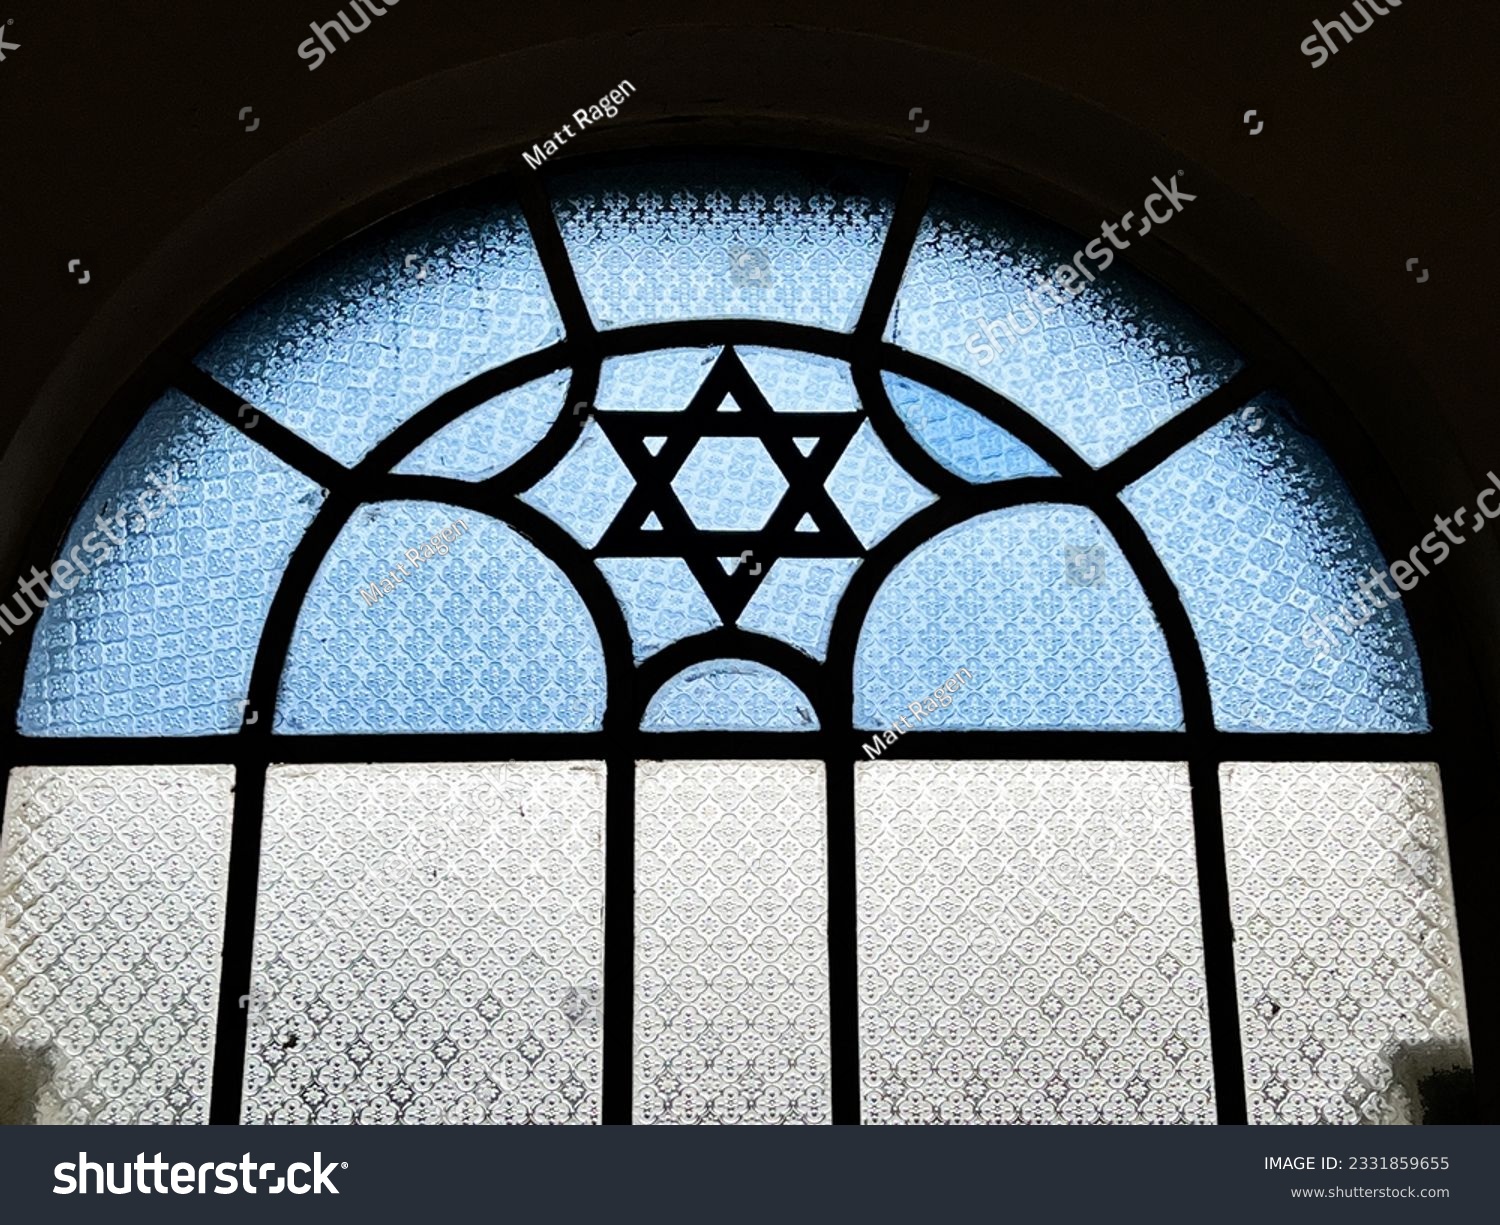 A stained glass window in a Singapore synagogue features a Star of David in blue and white glass as an architectural feature. #2331859655